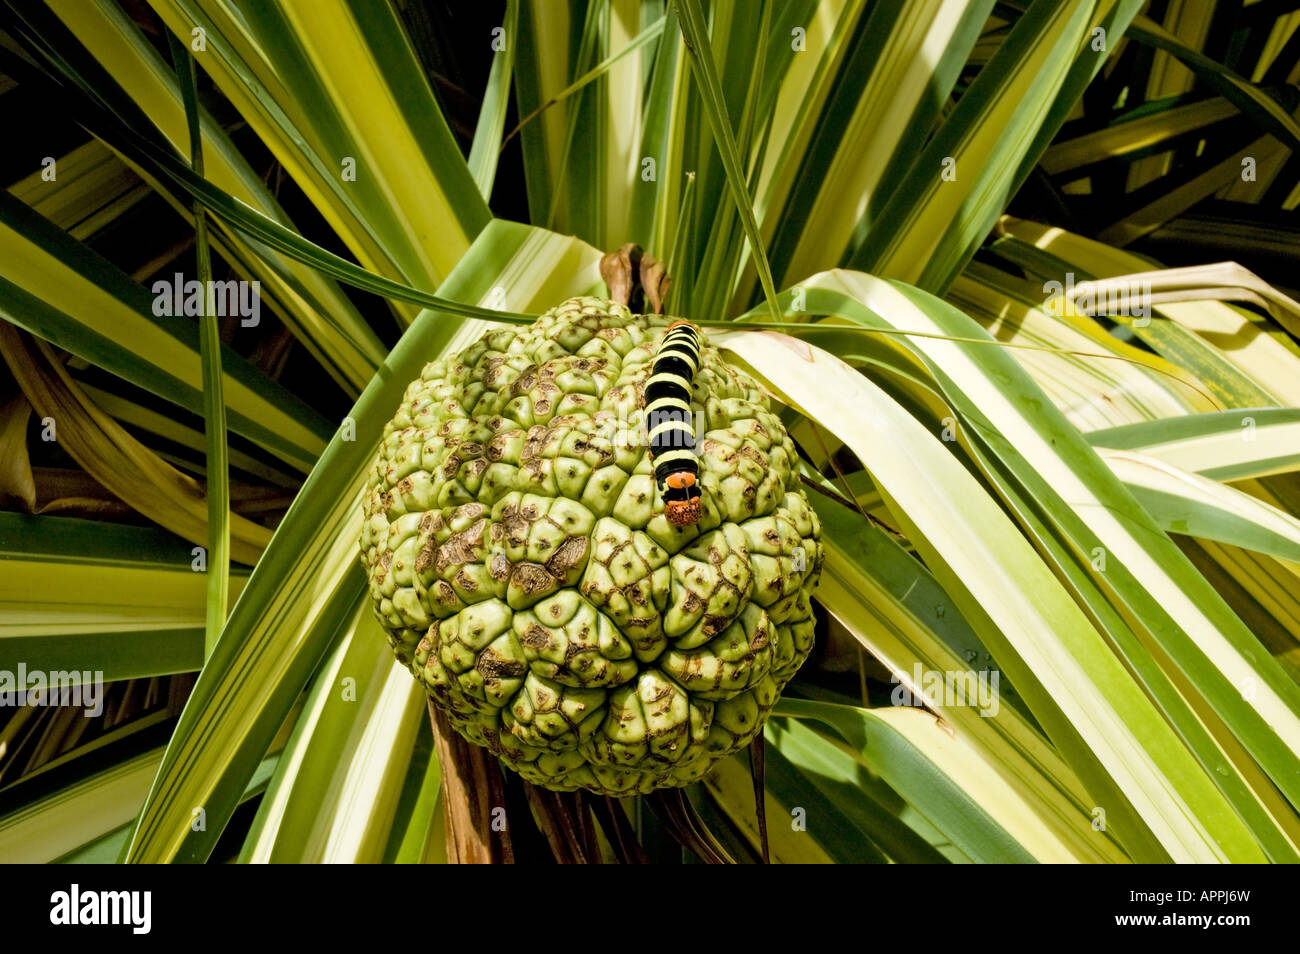 A black and white caterpiller (Pseudosphinx Tetrio) on a Pandanus fruit among dark and light striped green leaves Stock Photo